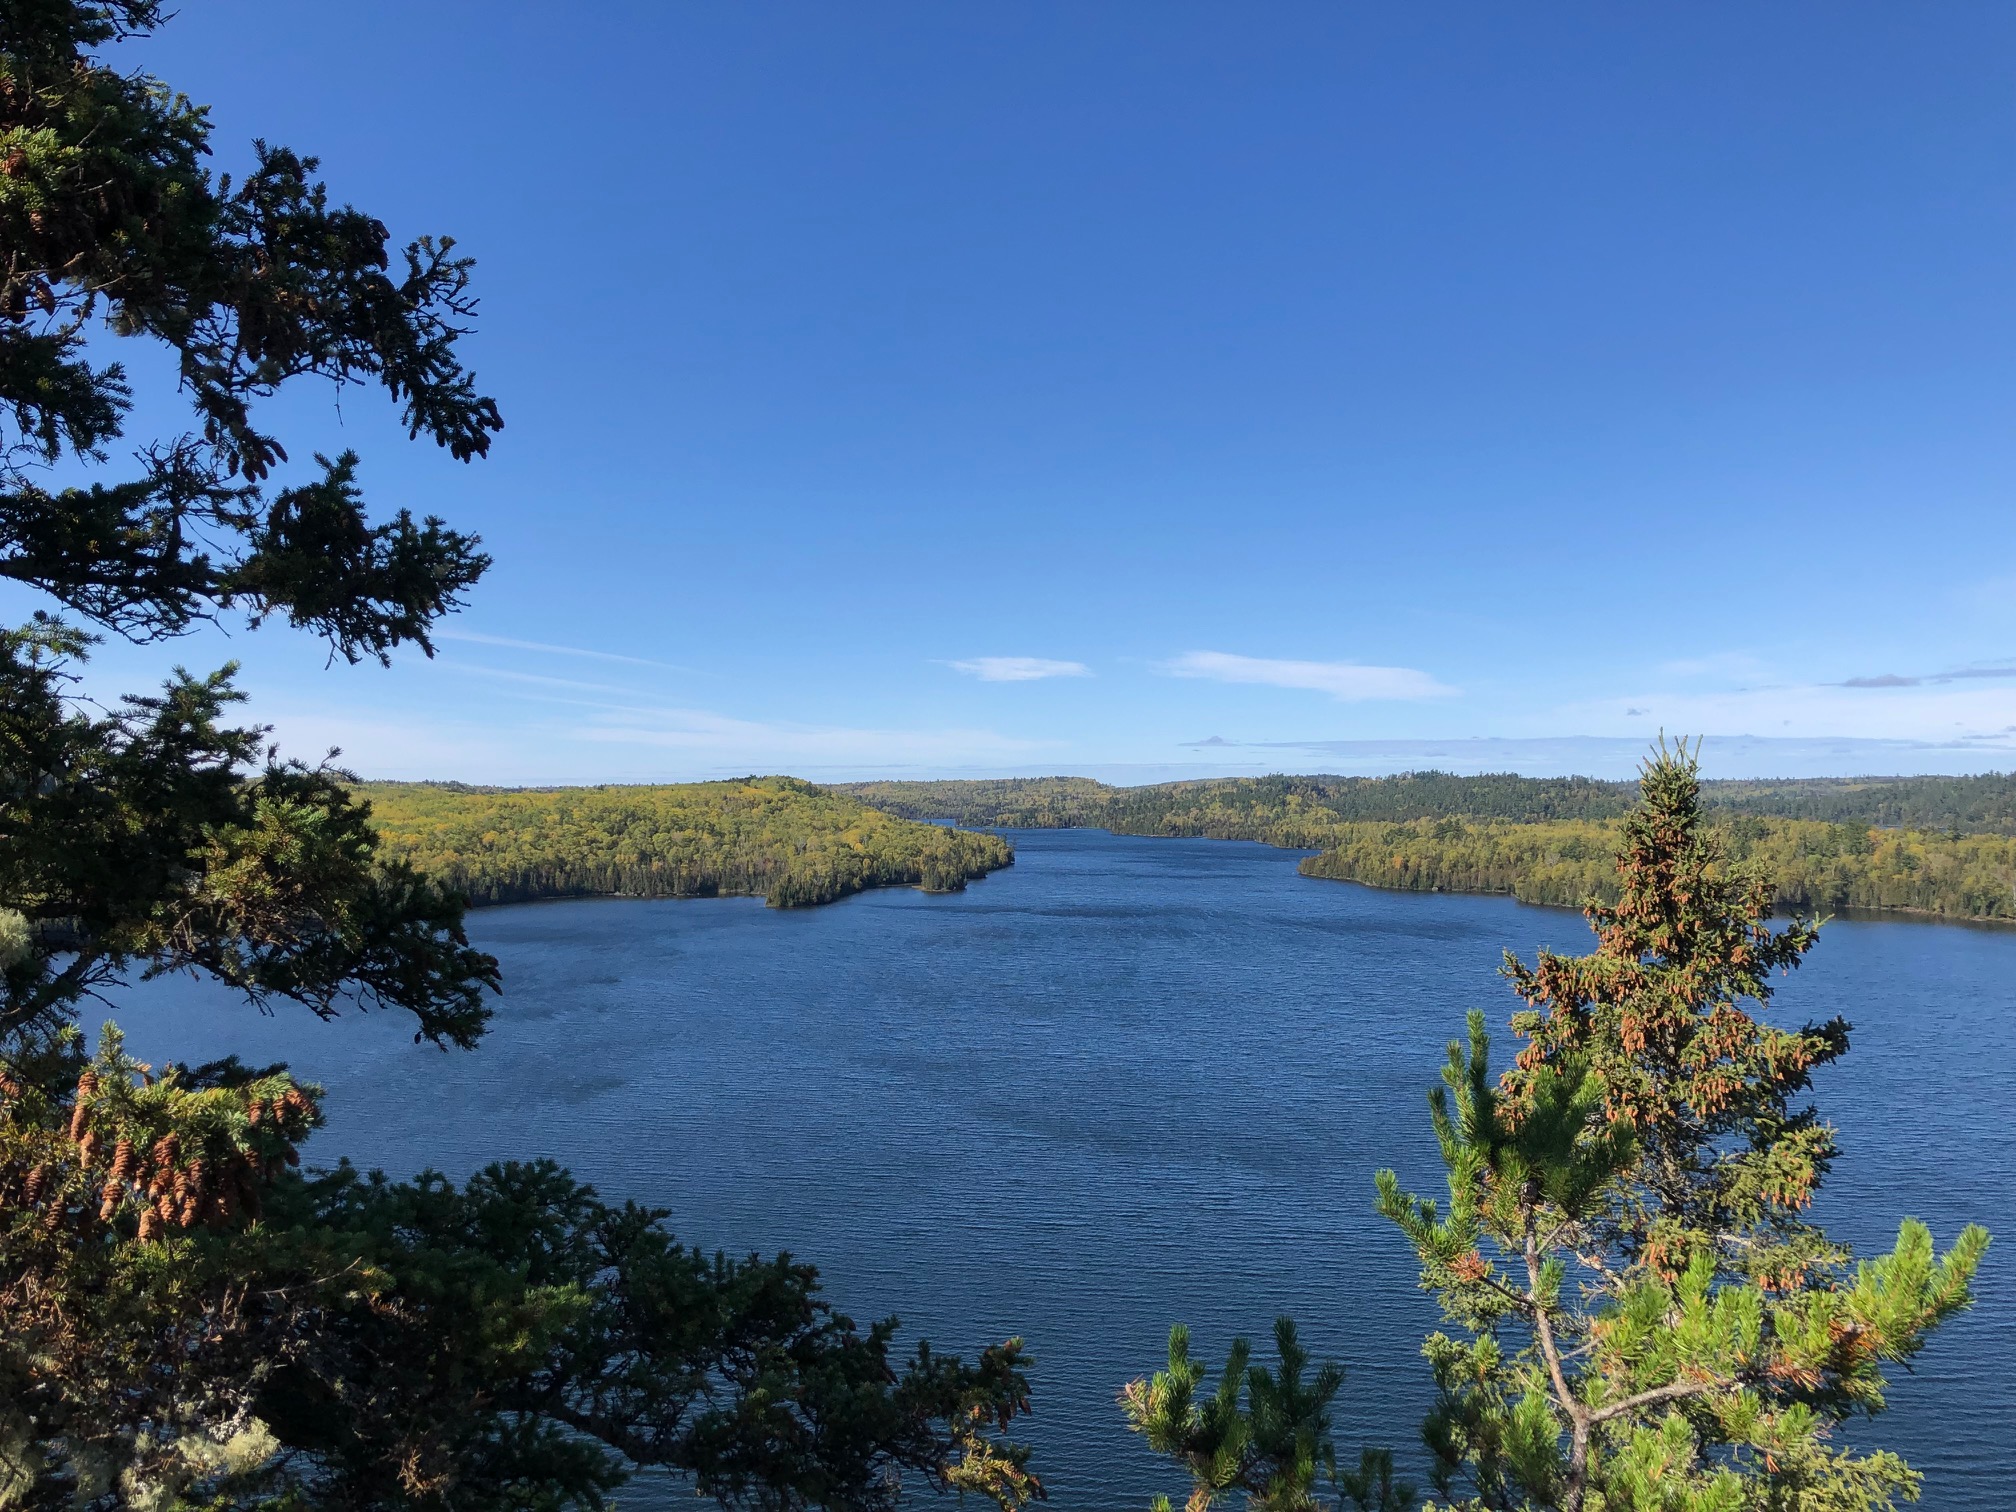 A view from a bluff overlooking a northern Minnesota lake on a sunny September day.